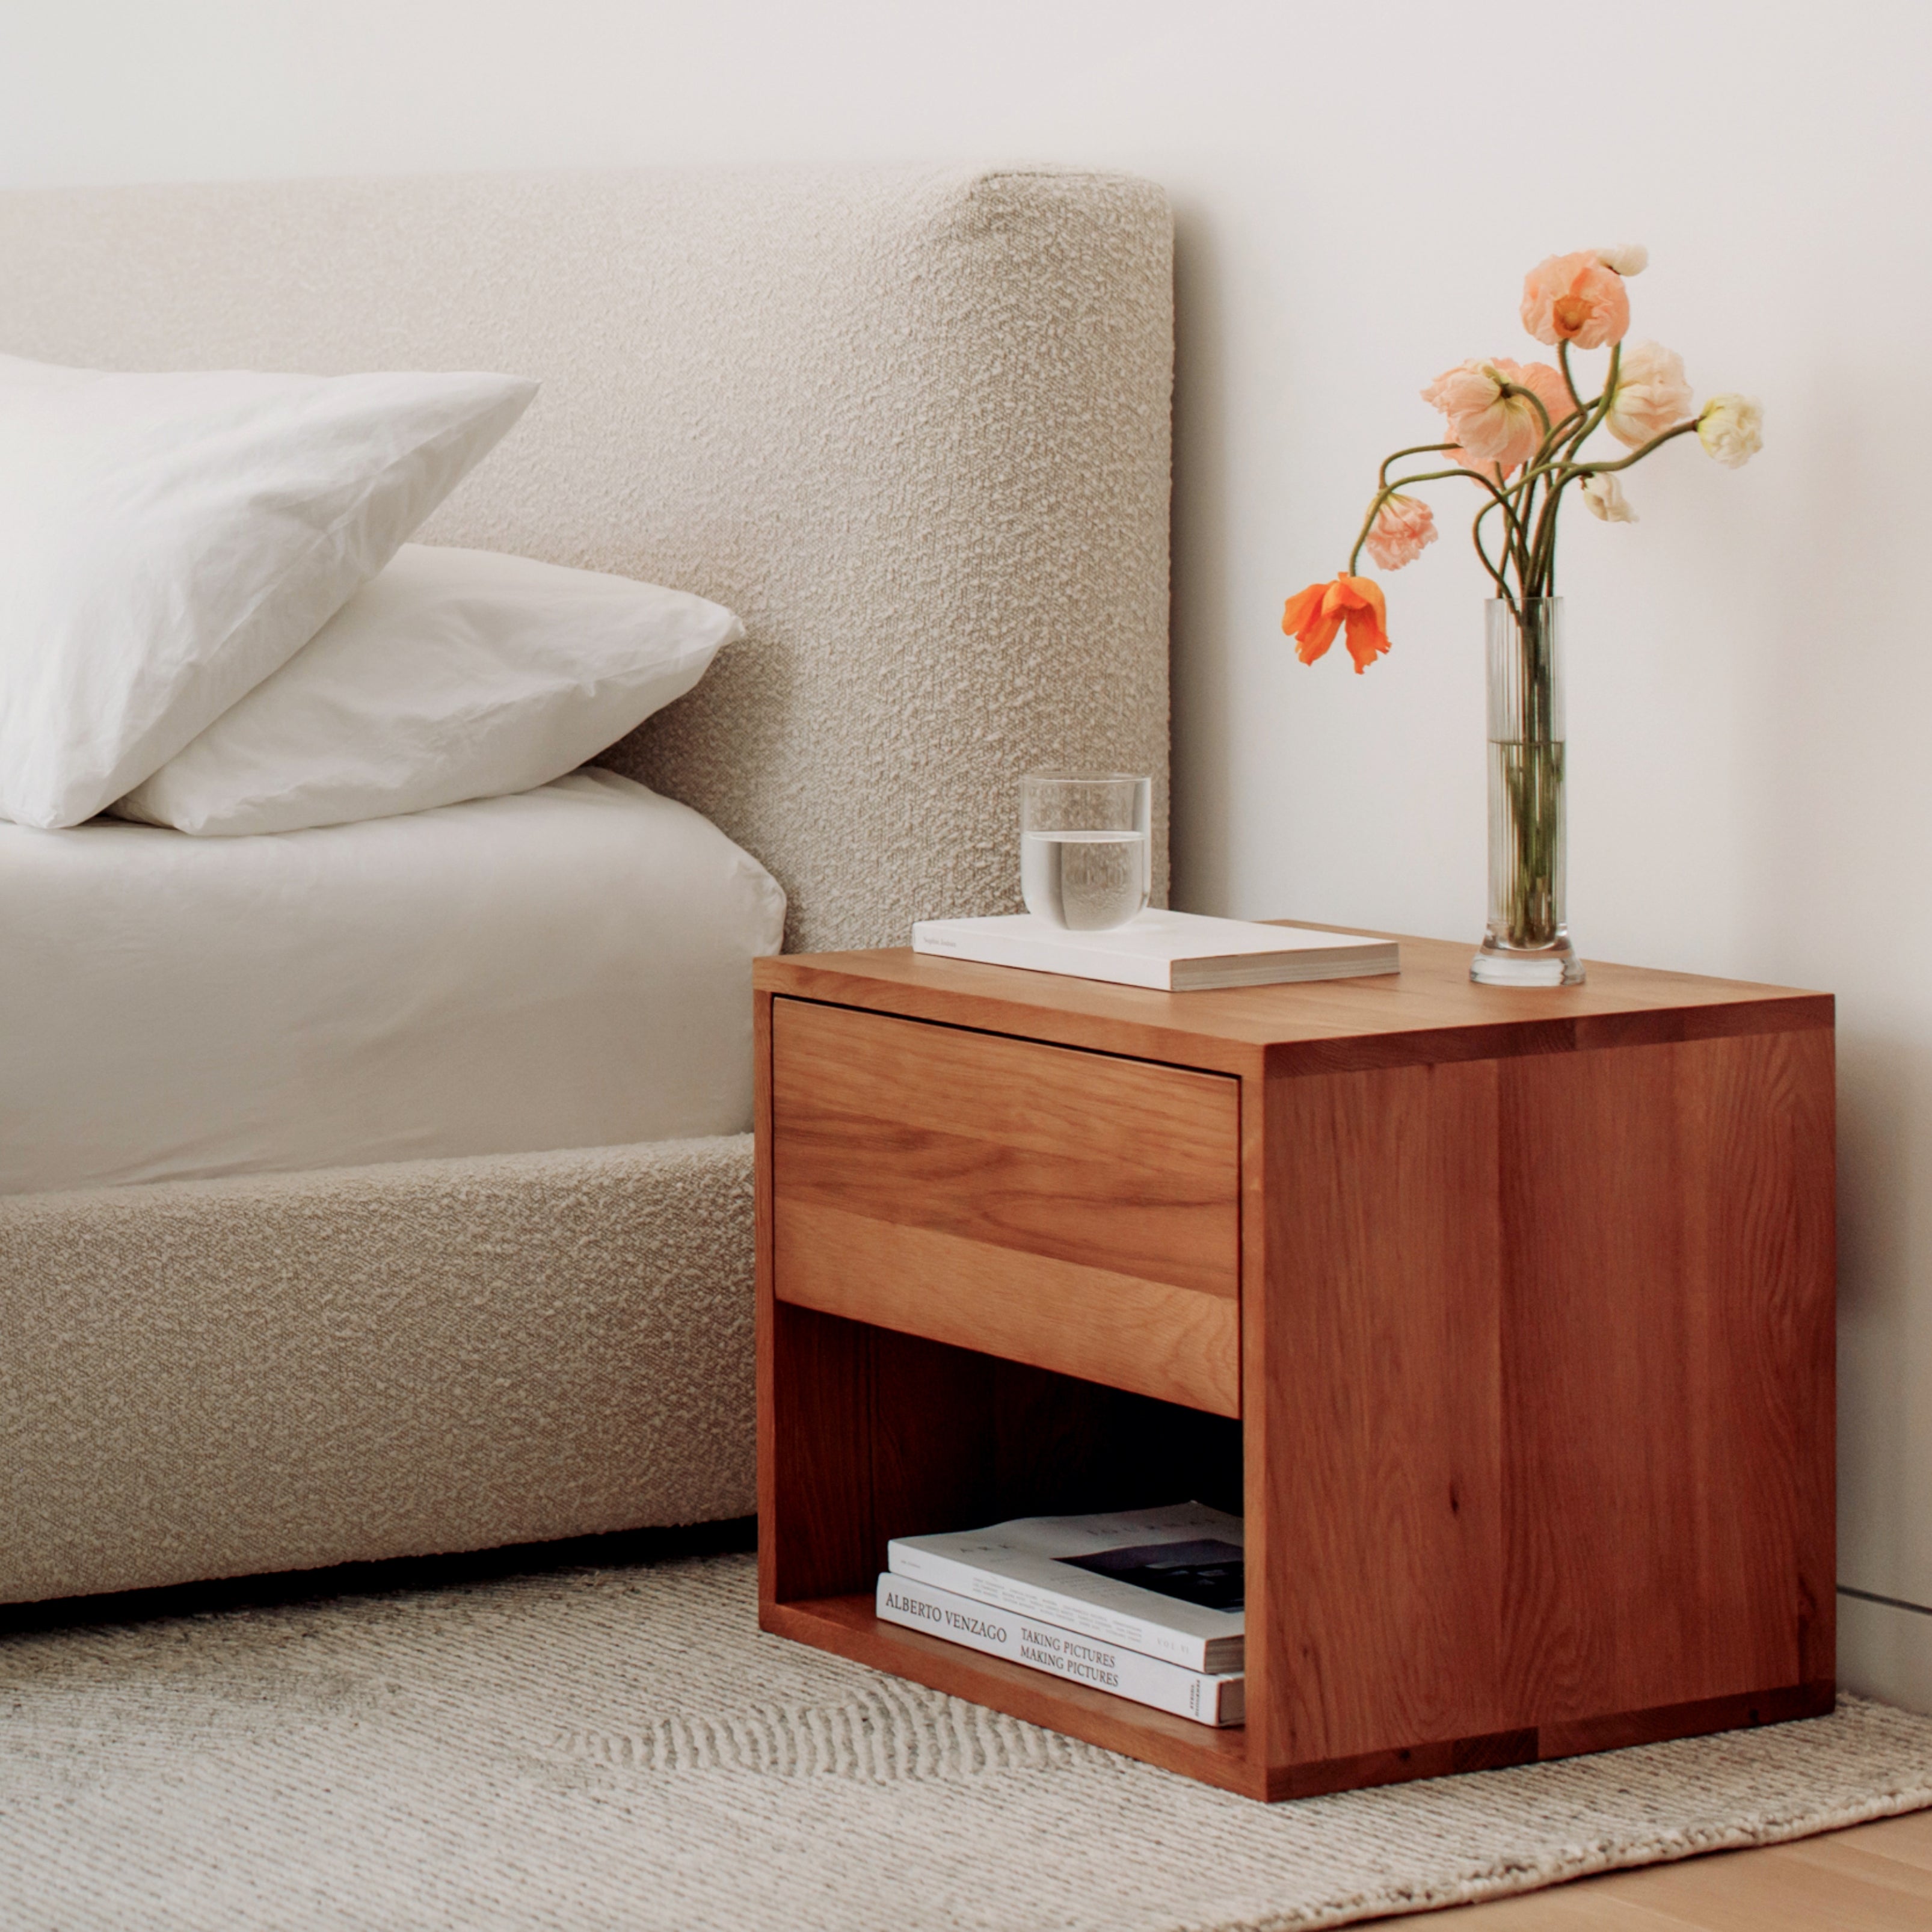 Rest Easy Nightstand With Drawer, Oak - Image 9